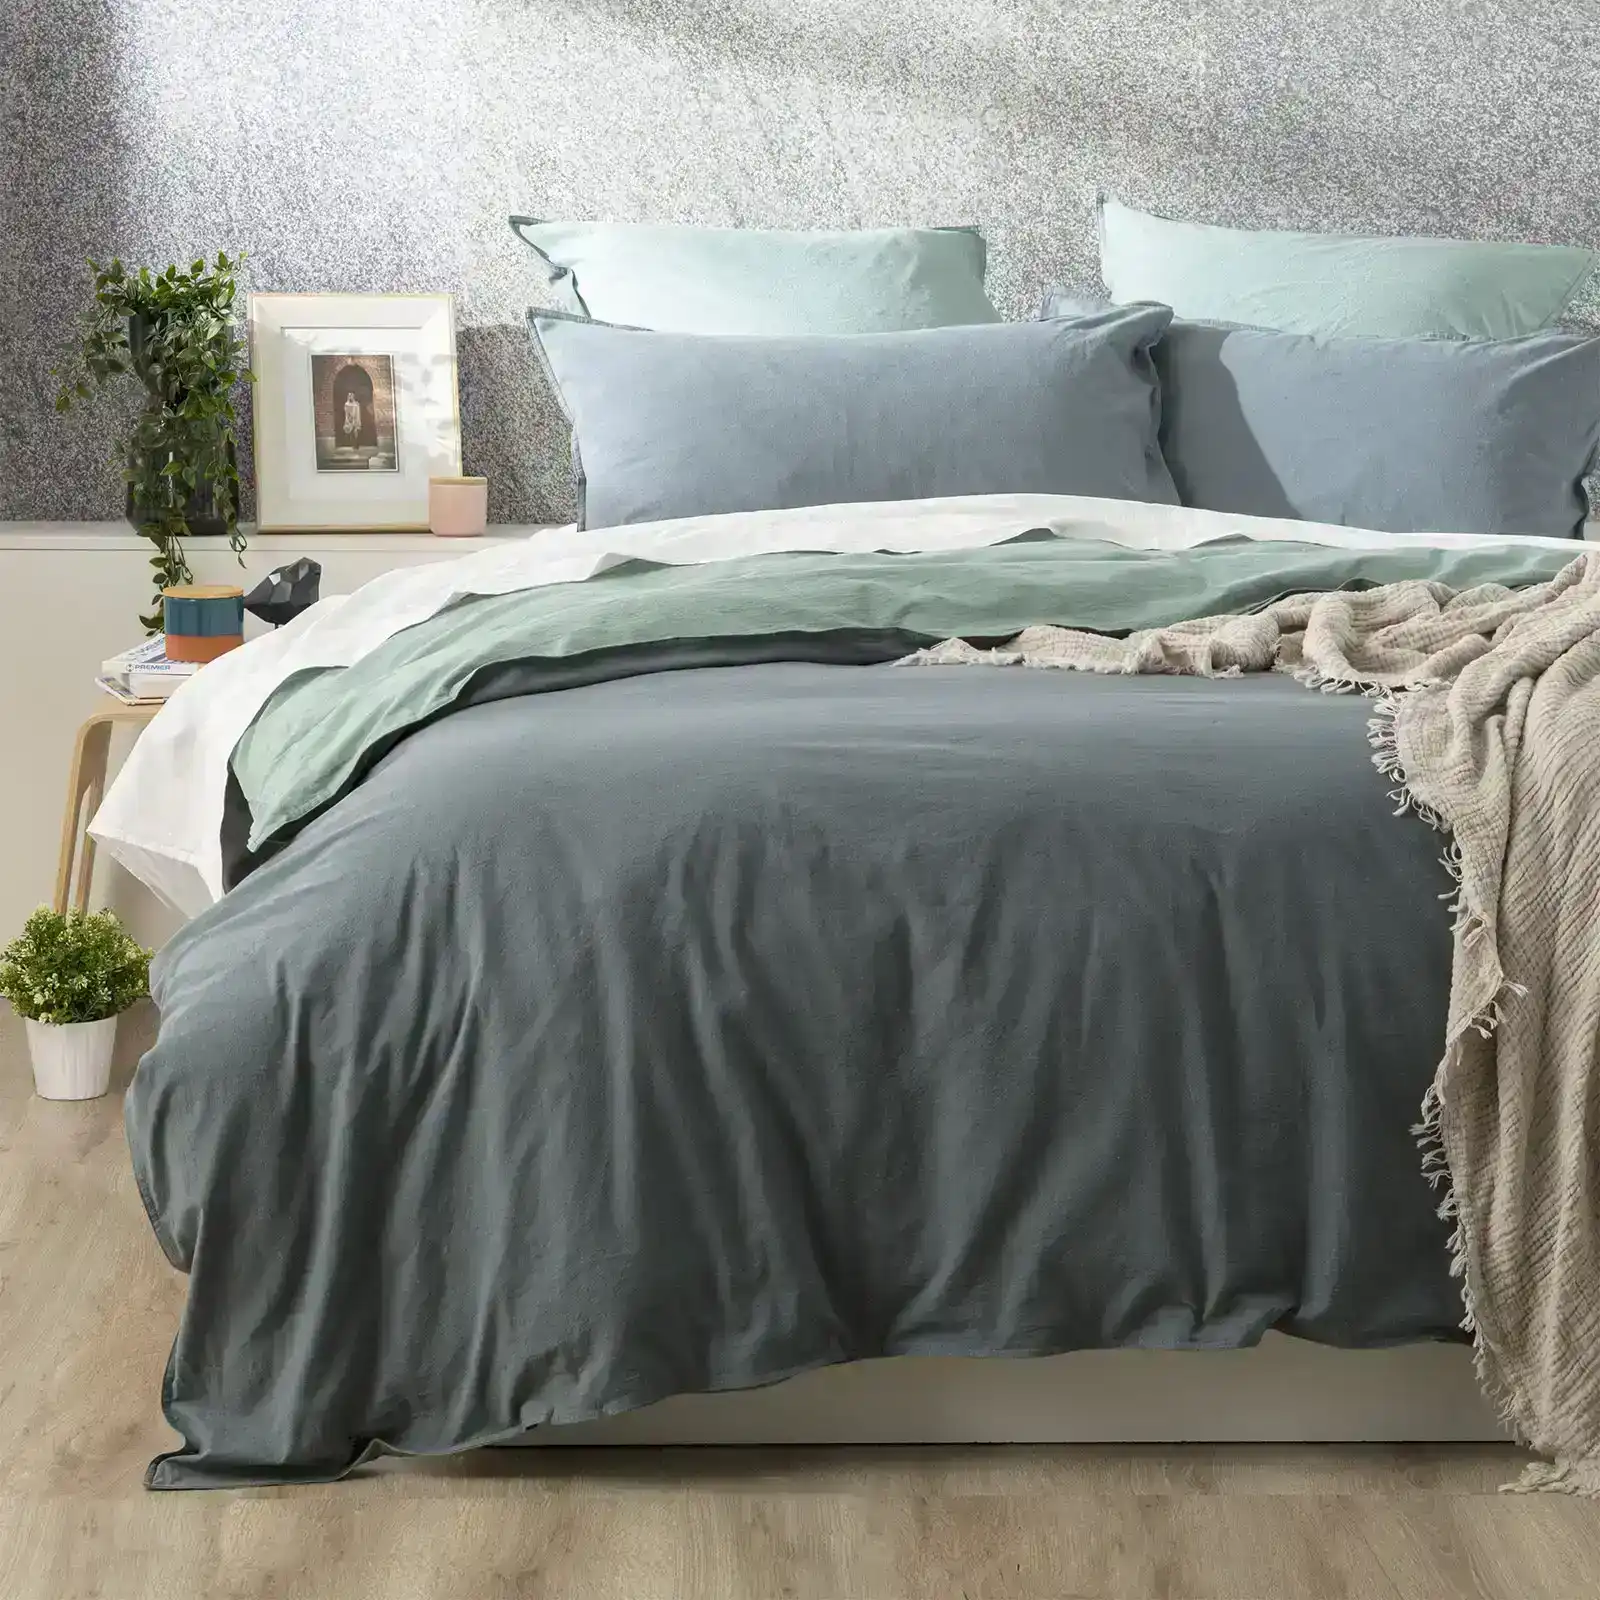 Renee Taylor Essentials Queen Bed Quilt Cover VT Stone Washed Reversible Mineral